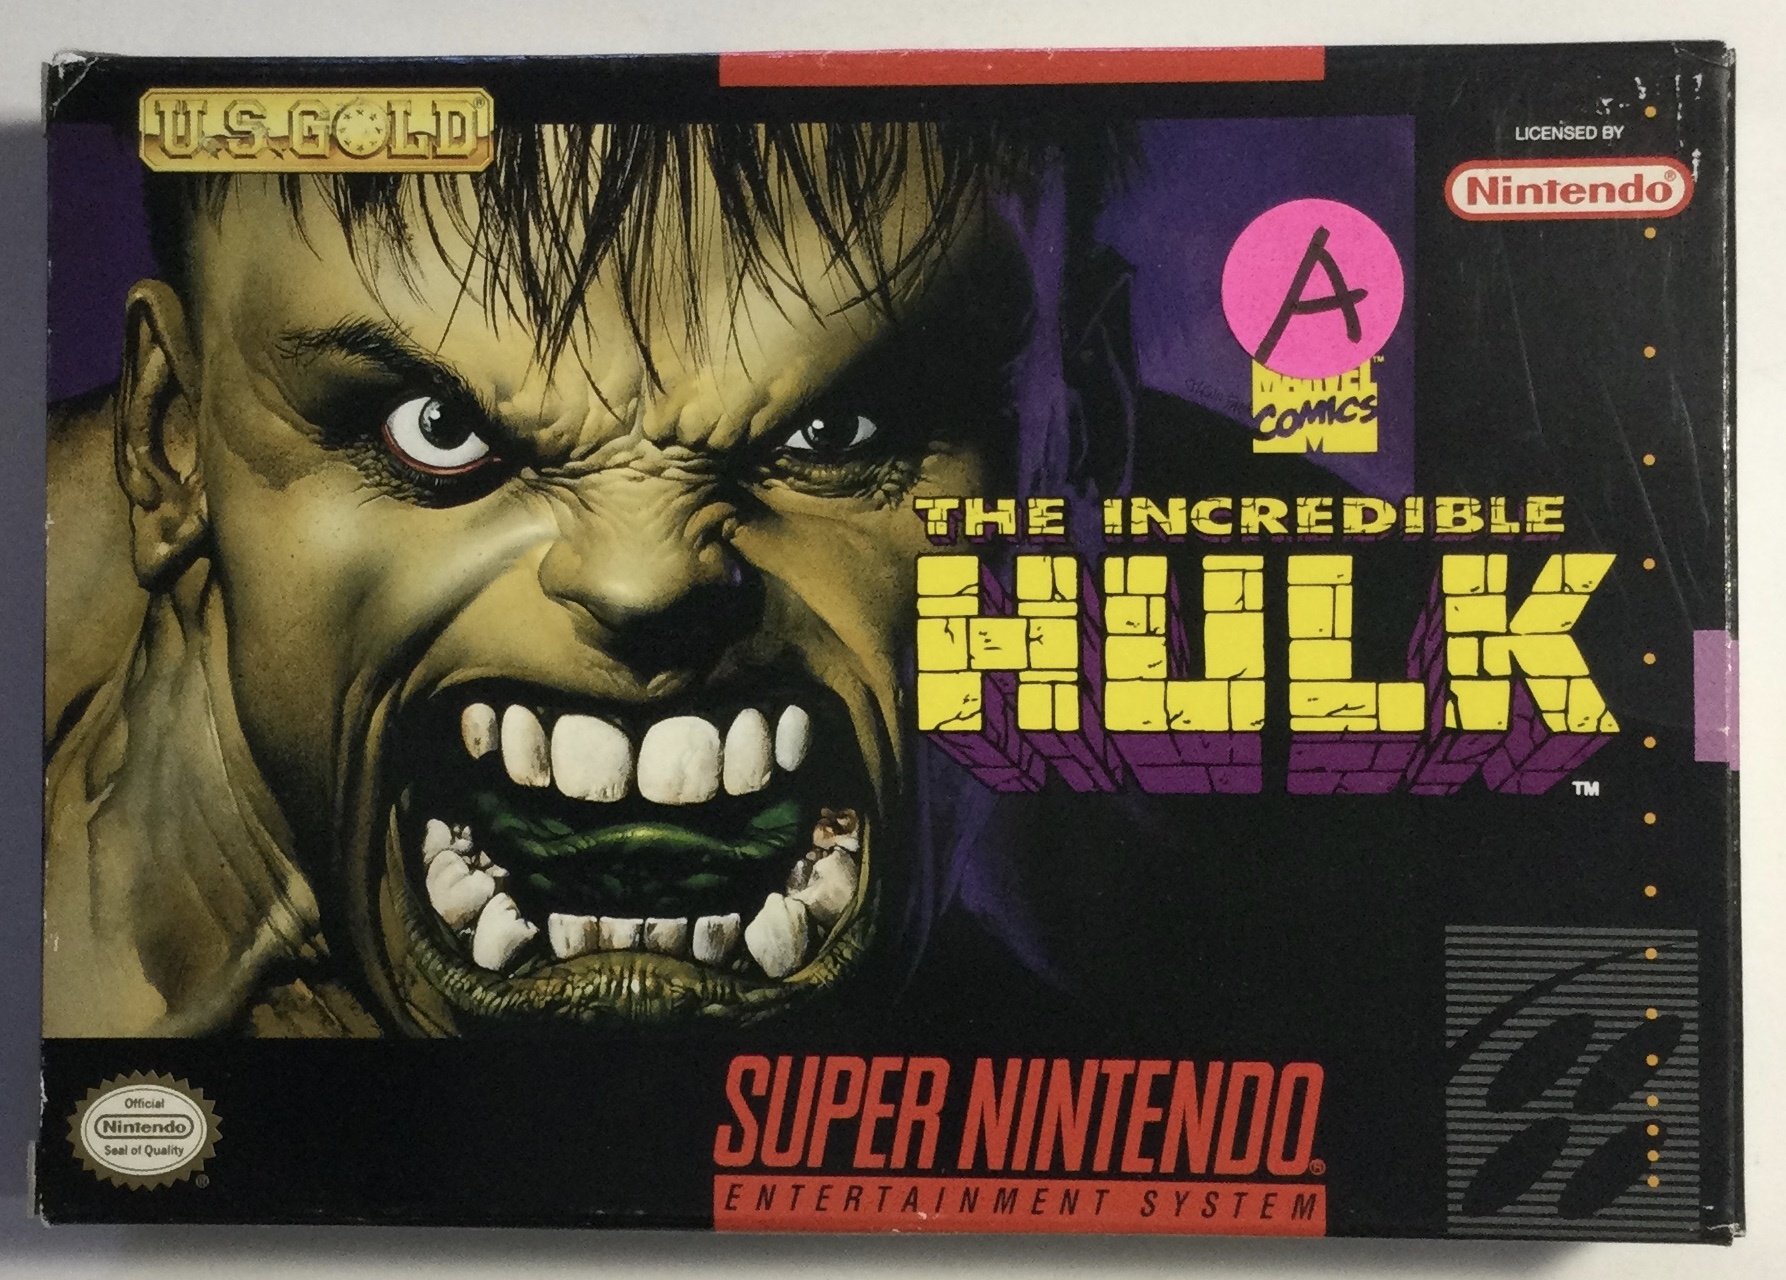 The Incredible Hulk for Super Nintendo Entertainment System (SNES)